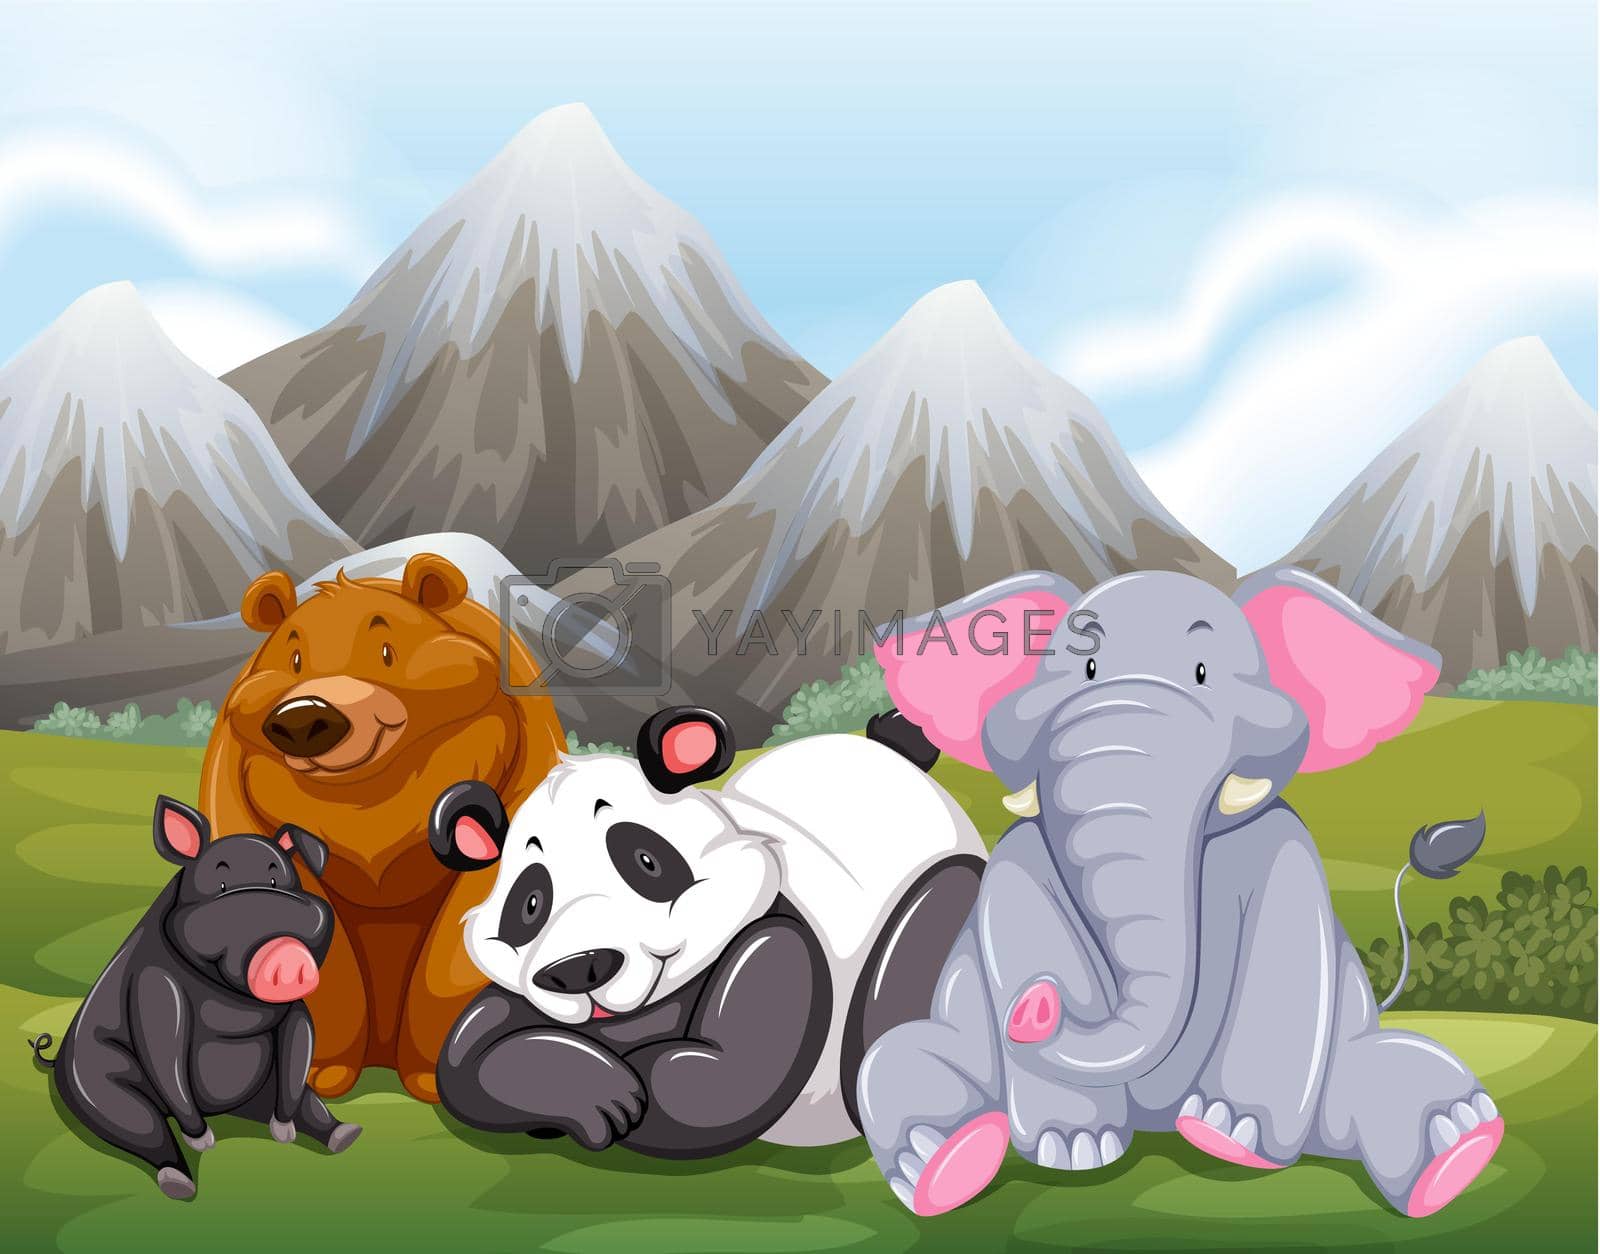 Animals sitting on grass with mountain view behind